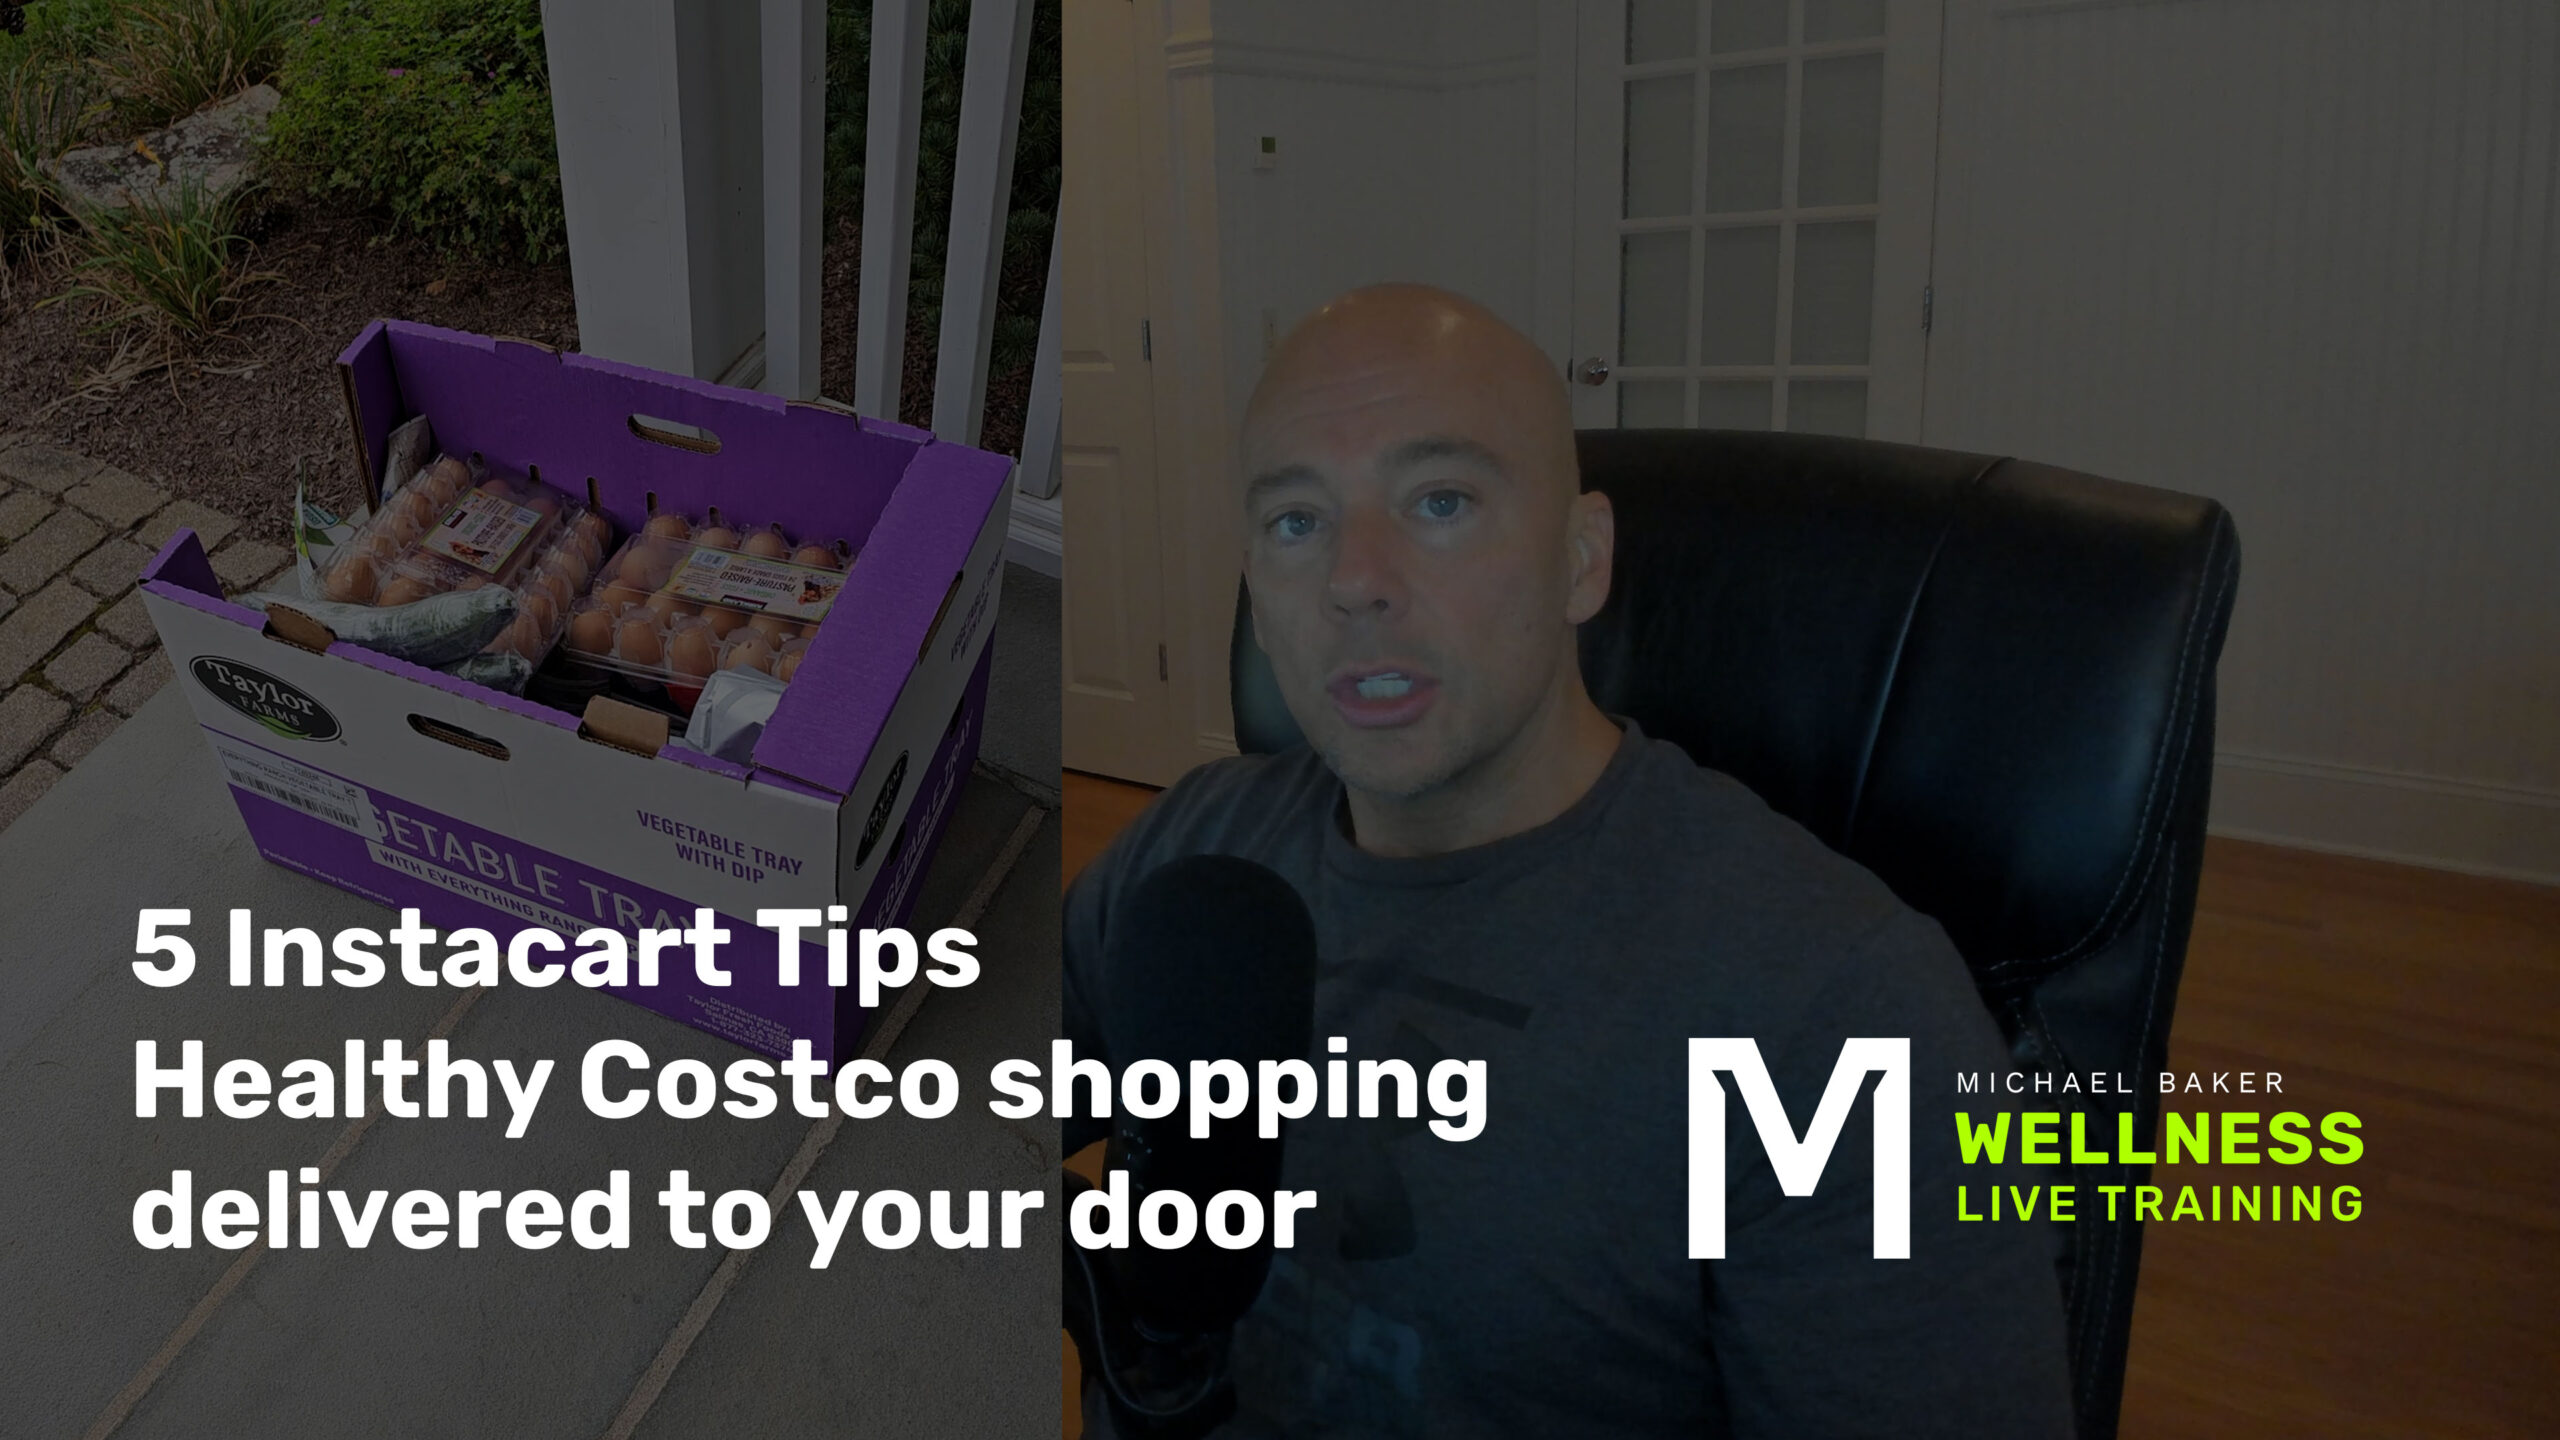 Featured image for “Instacart Tips – Healthy Costco shopping delivered to your door”